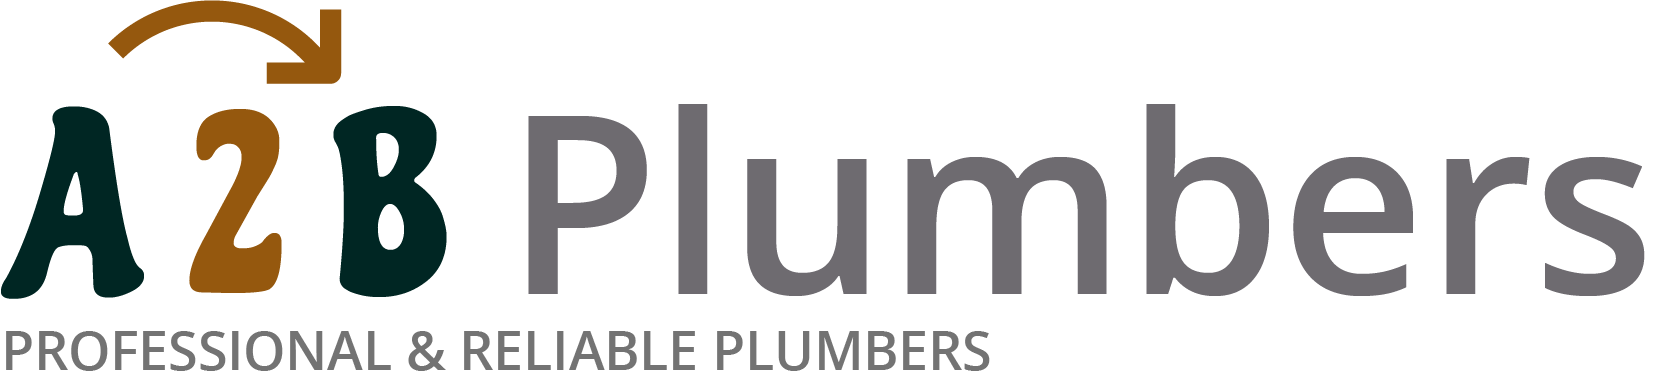 If you need a boiler installed, a radiator repaired or a leaking tap fixed, call us now - we provide services for properties in Paisley and the local area.